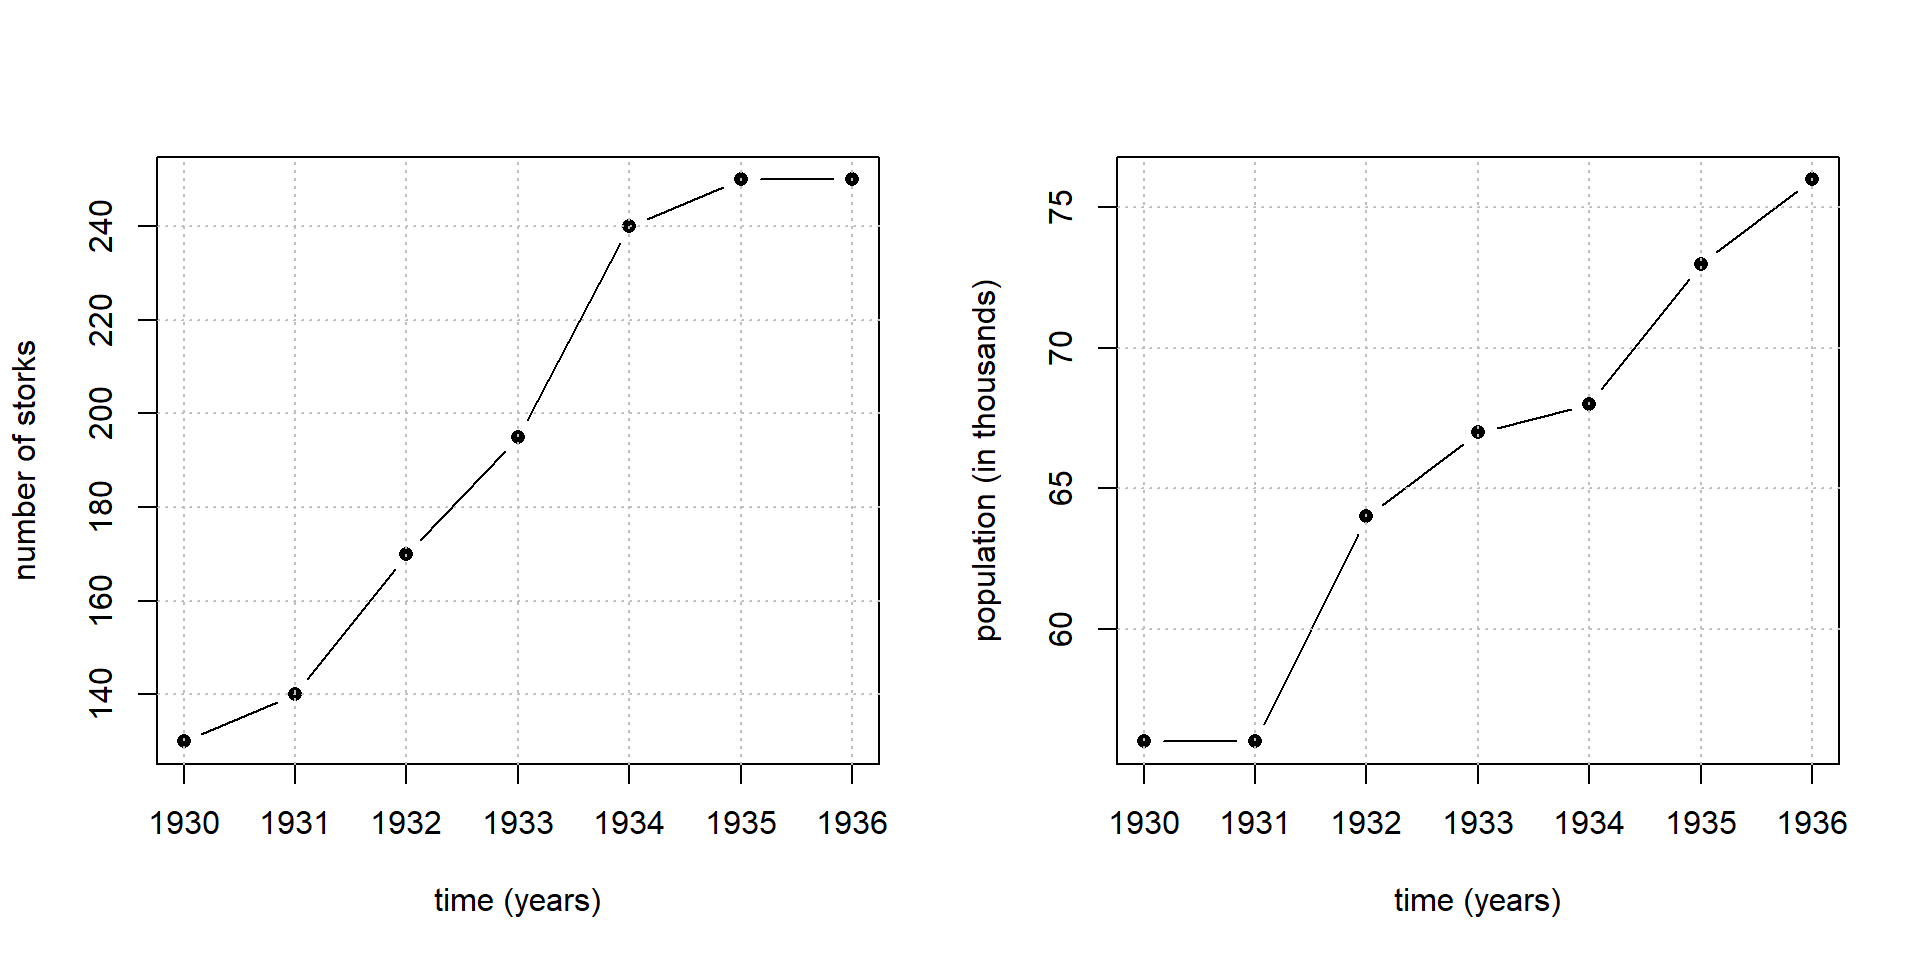 Number of storcks and population size plotted versus time in Oldenburg/Germany between 1930-1936